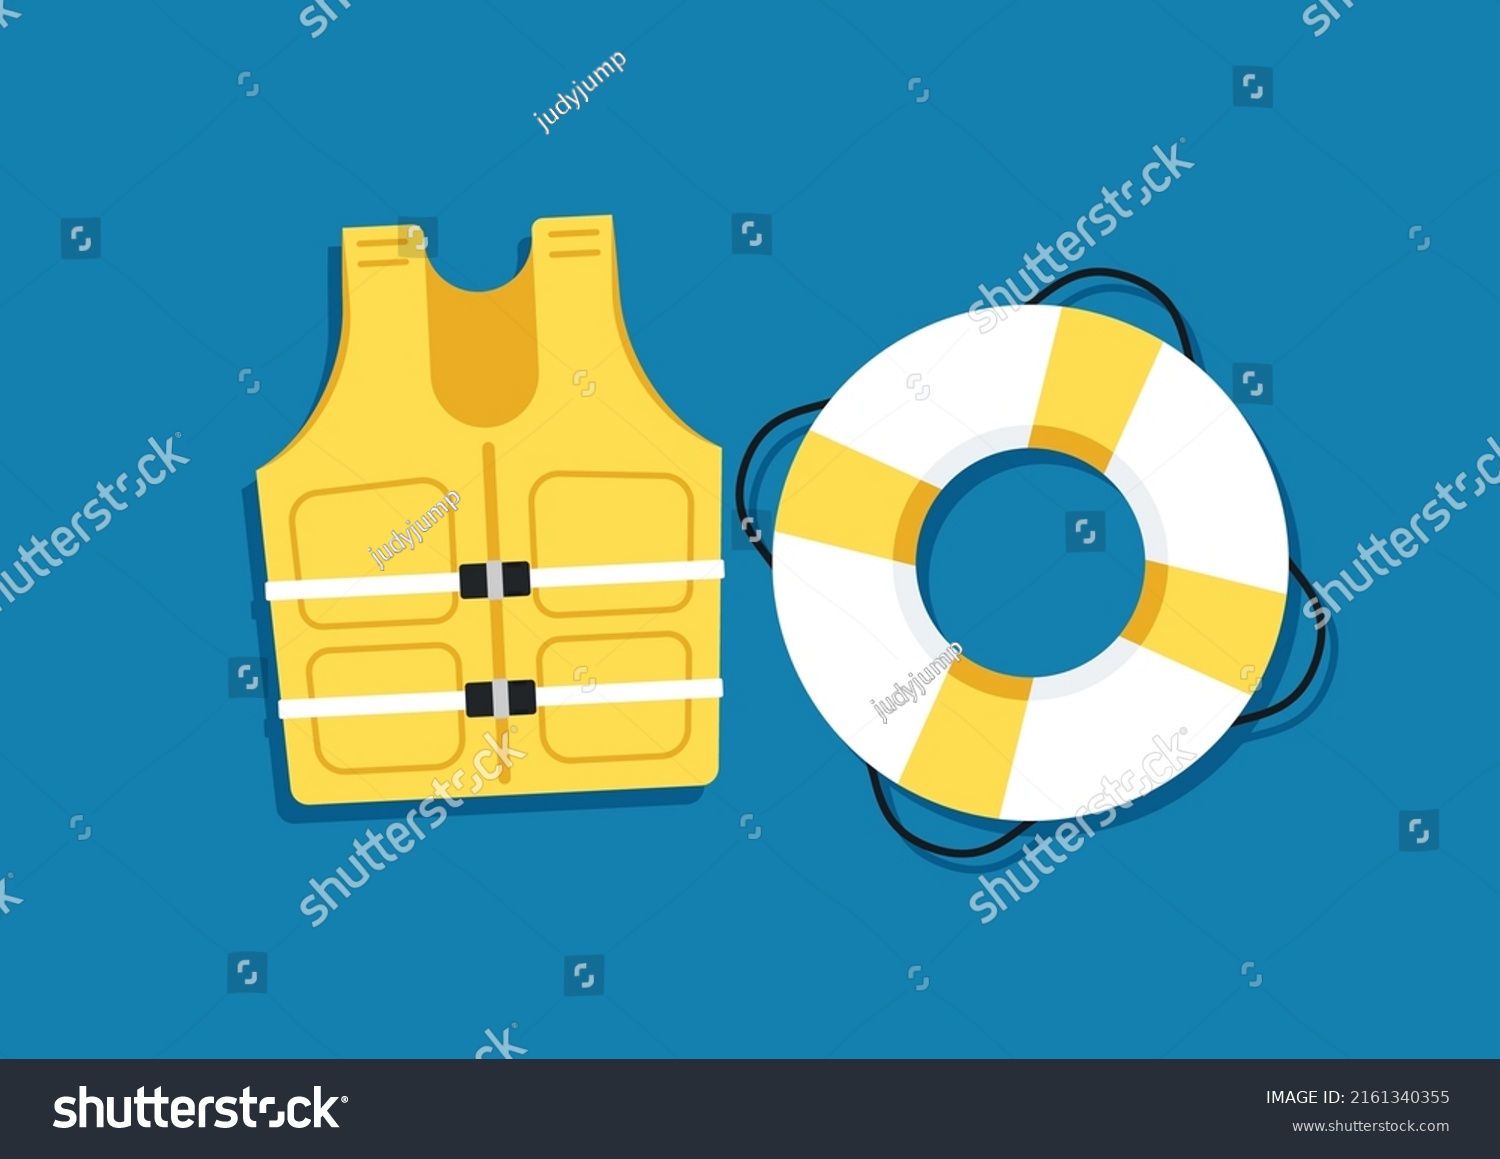 SVG of Lifebuoy and life Jacket cartoon vector. Vector flat style colored illustration of Lifebuoy and Life jacket on blue background. svg